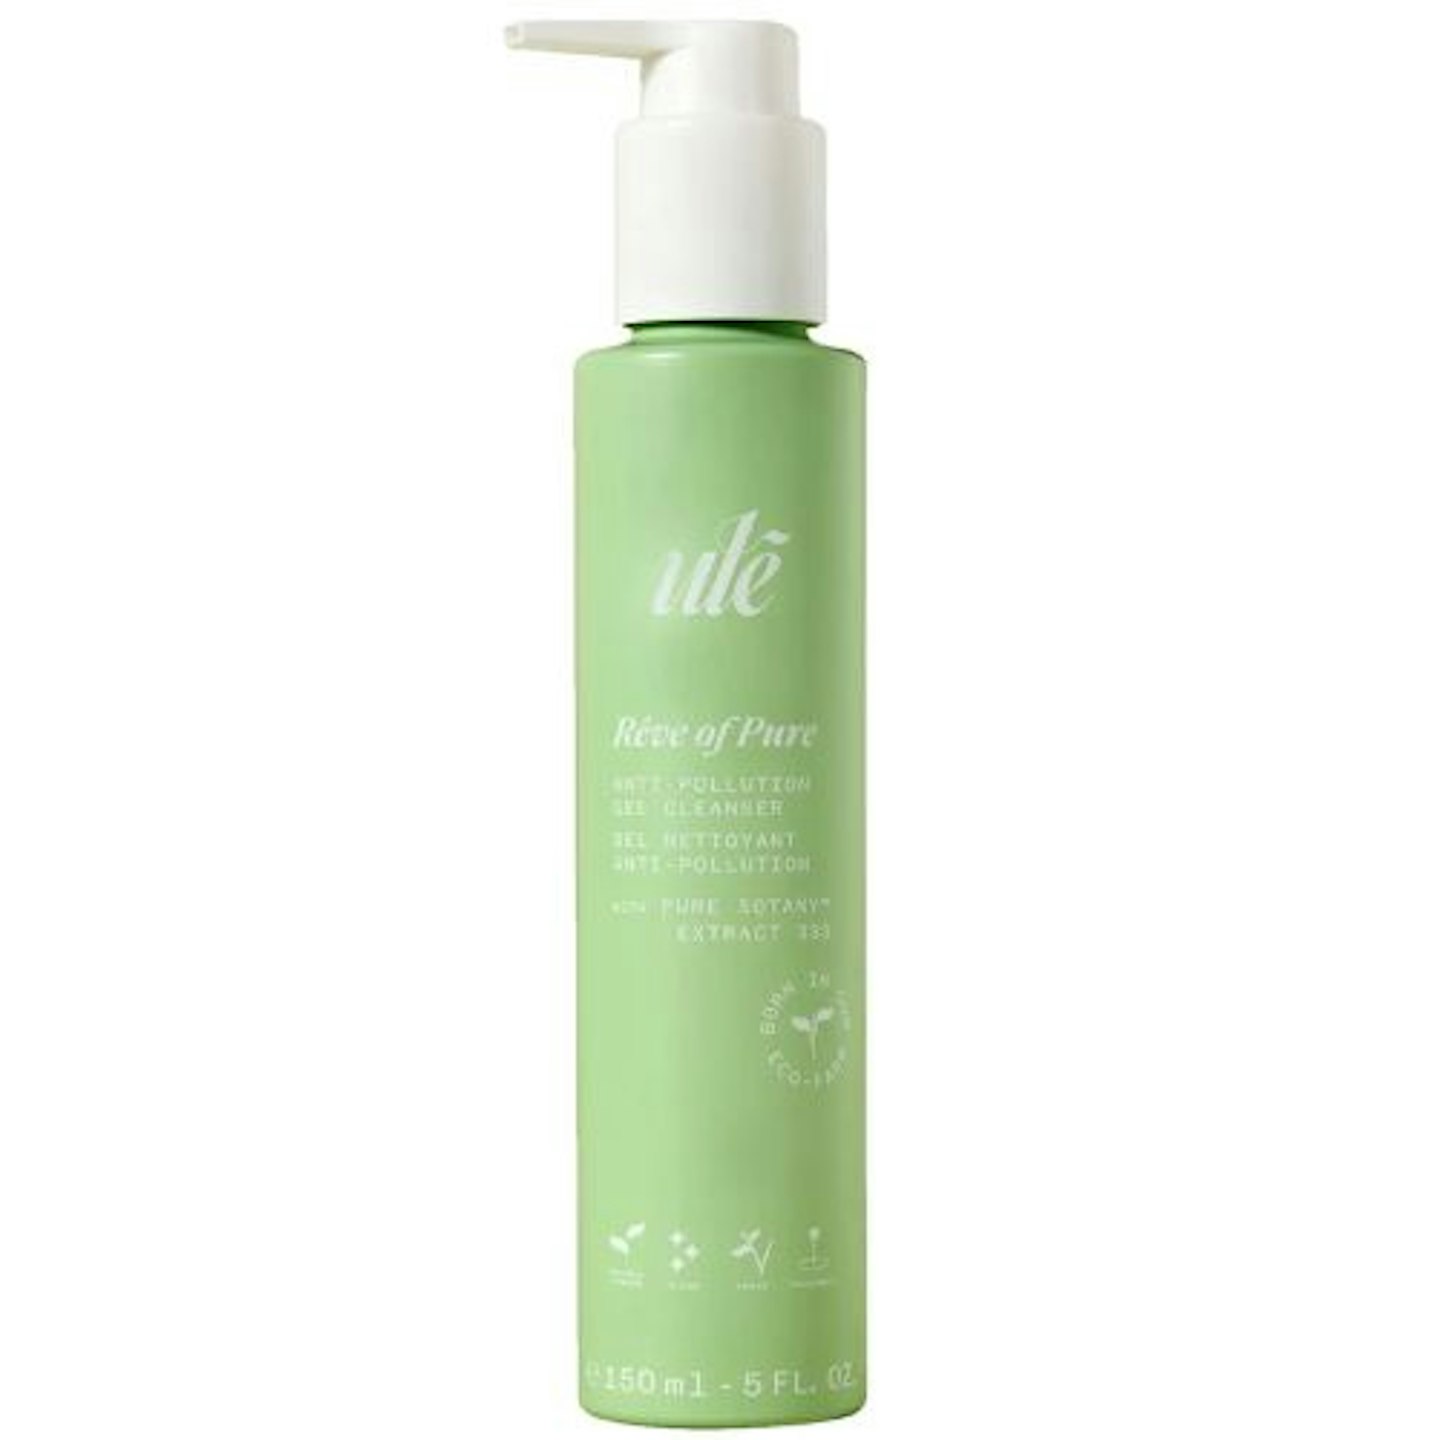 Ulé Reve of Pure Anti-Pollution Gel Cleanser